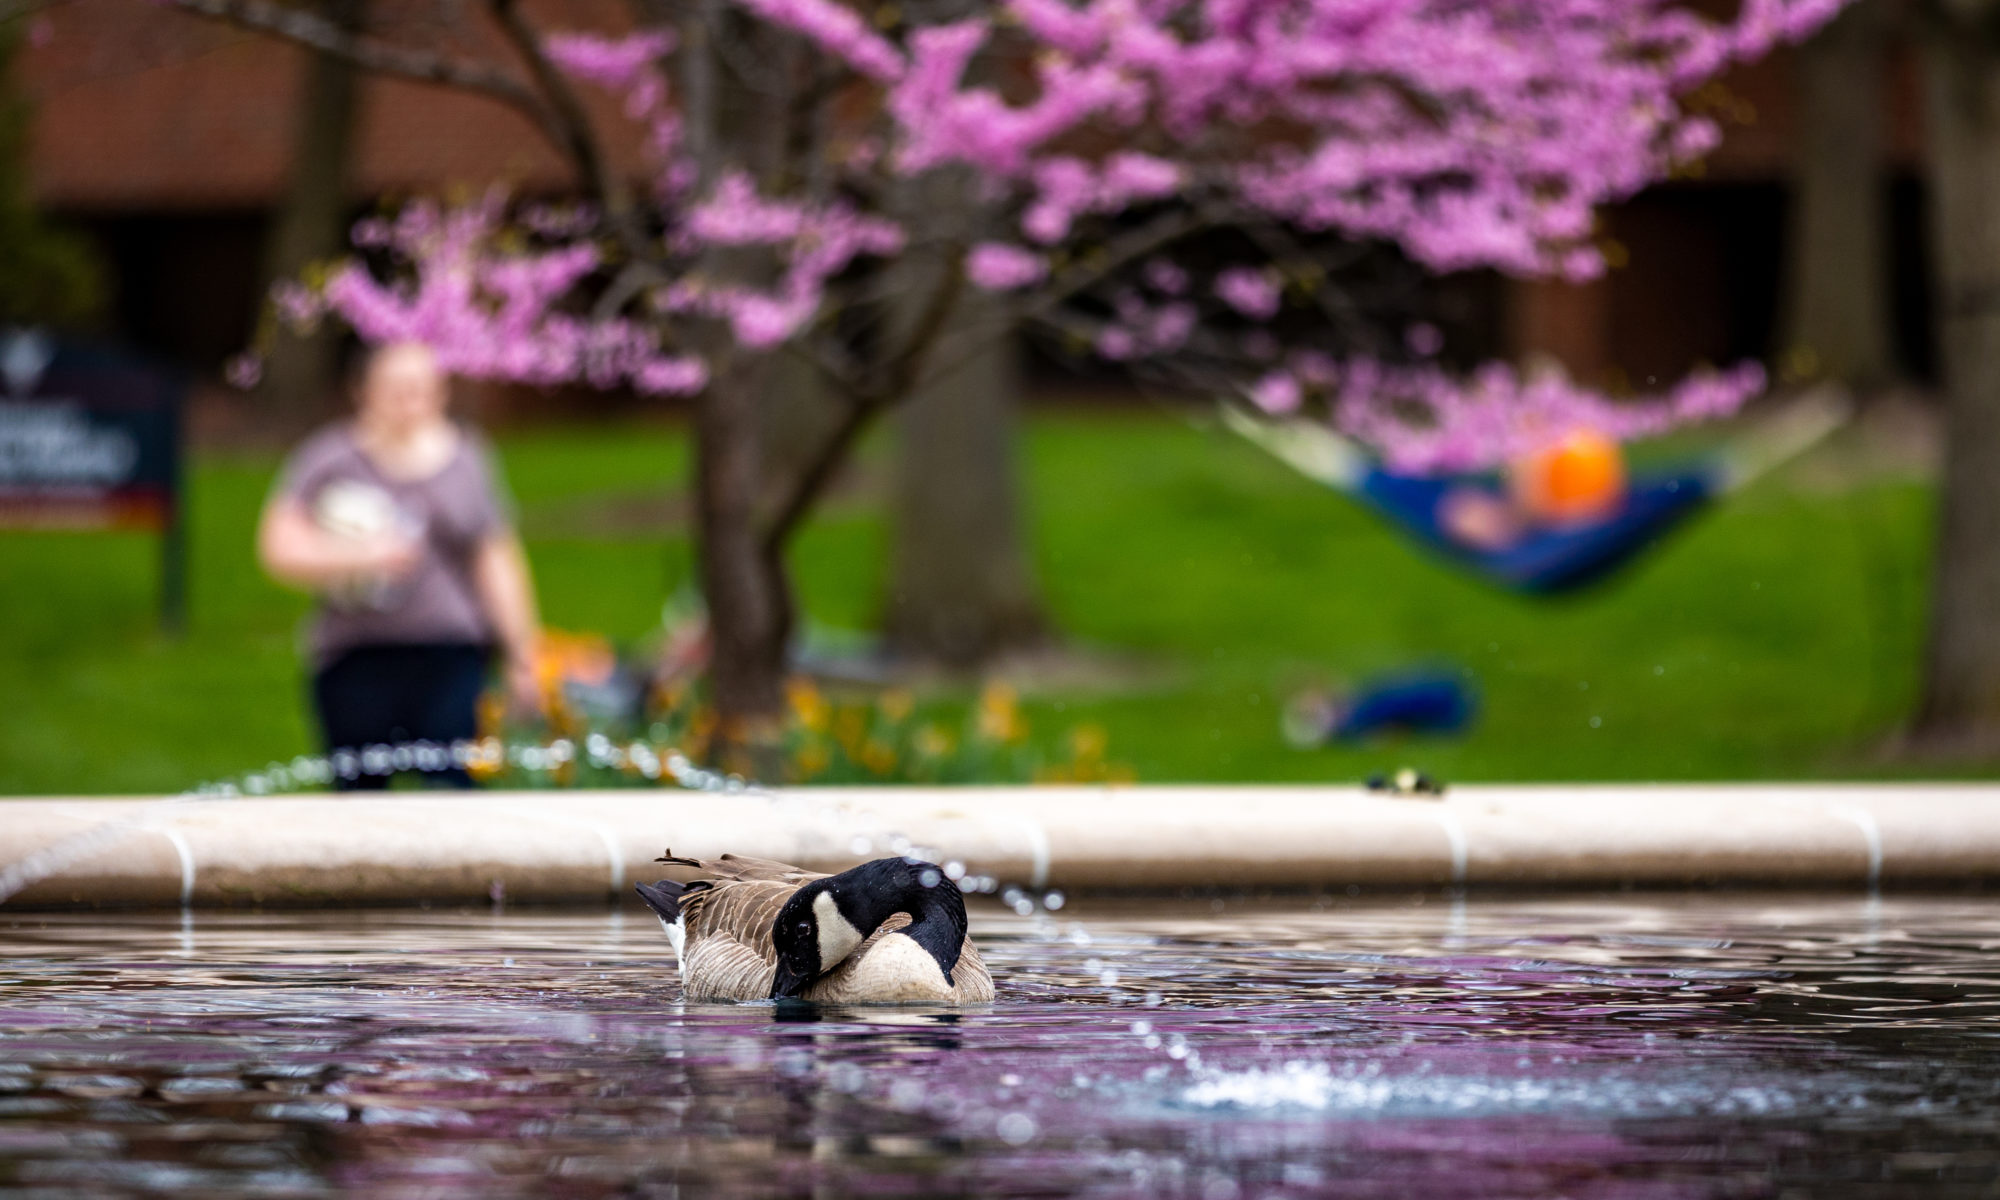 A goose in a fountain takes up for foreground of the photo. In the background, students lounge on a green lawn with blooming trees overhead